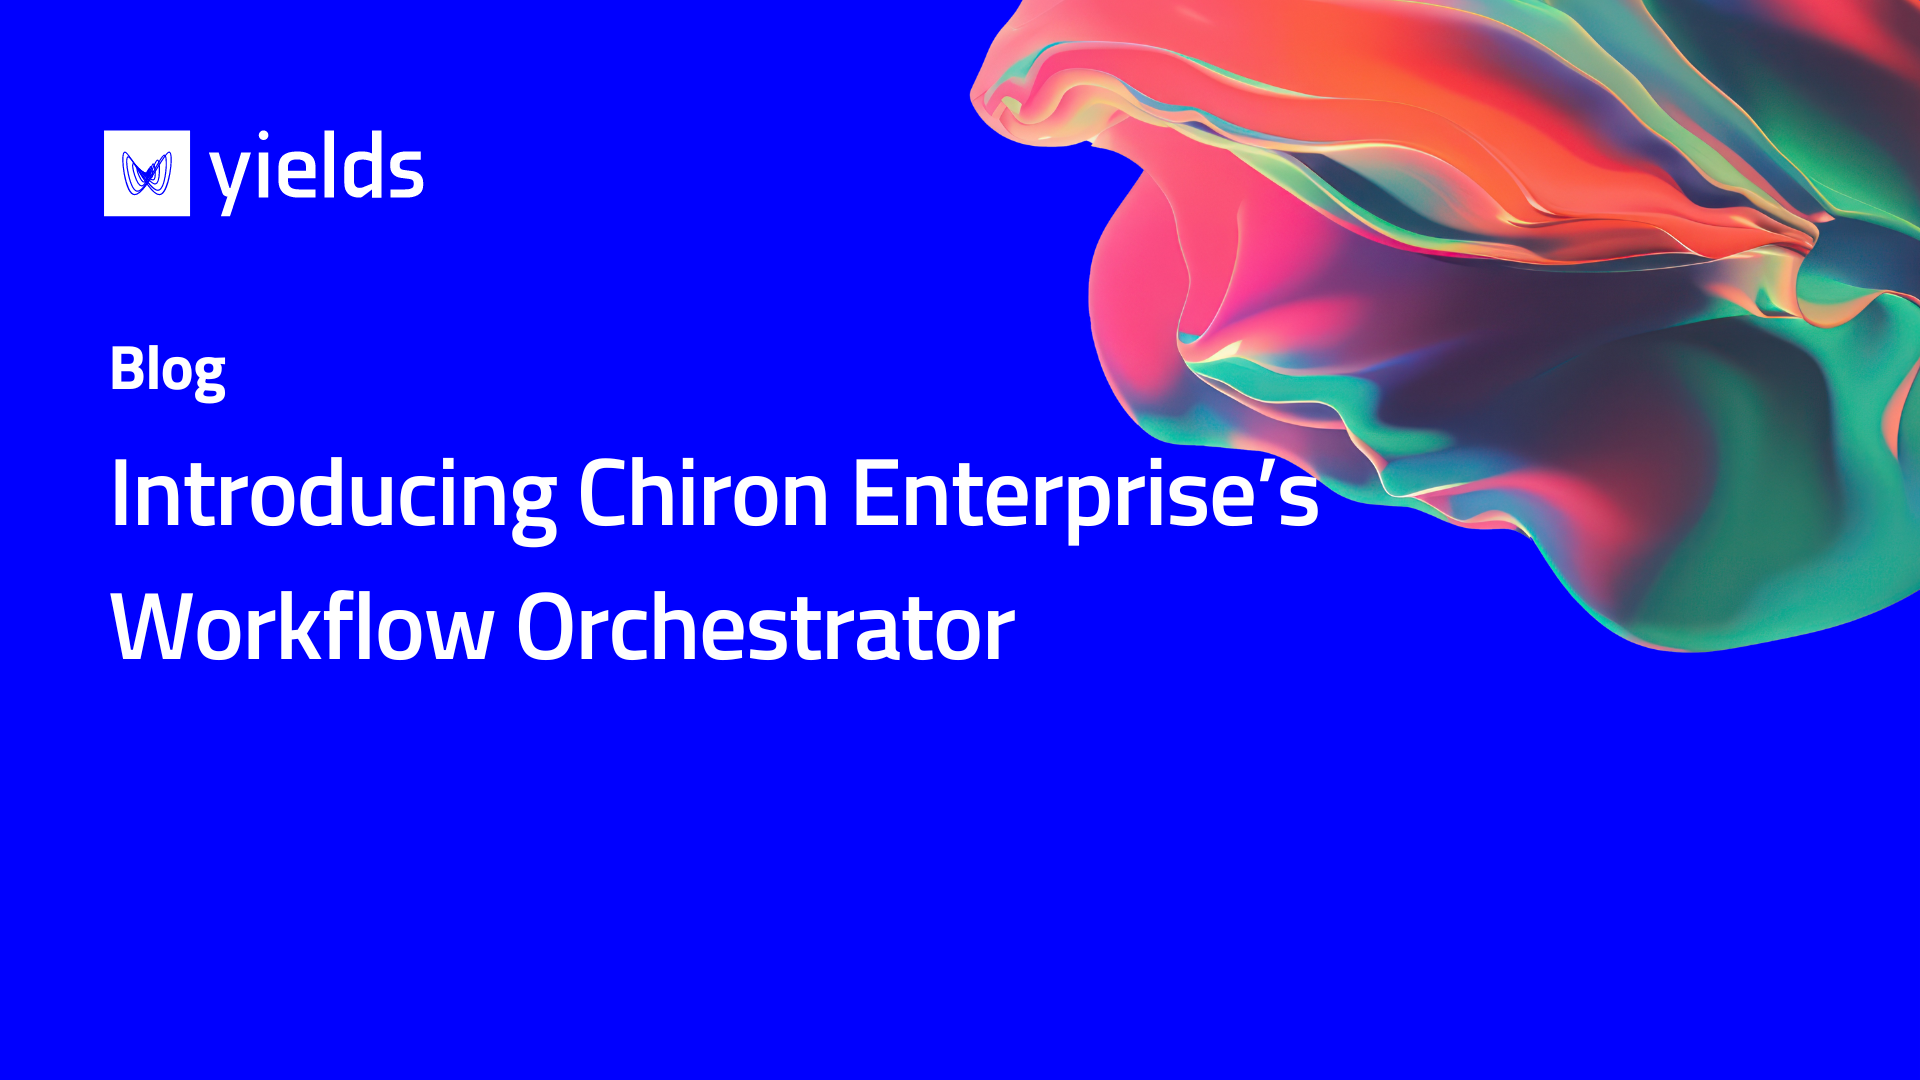 Introducing Chiron Enterprise’s Workflow Orchestrator